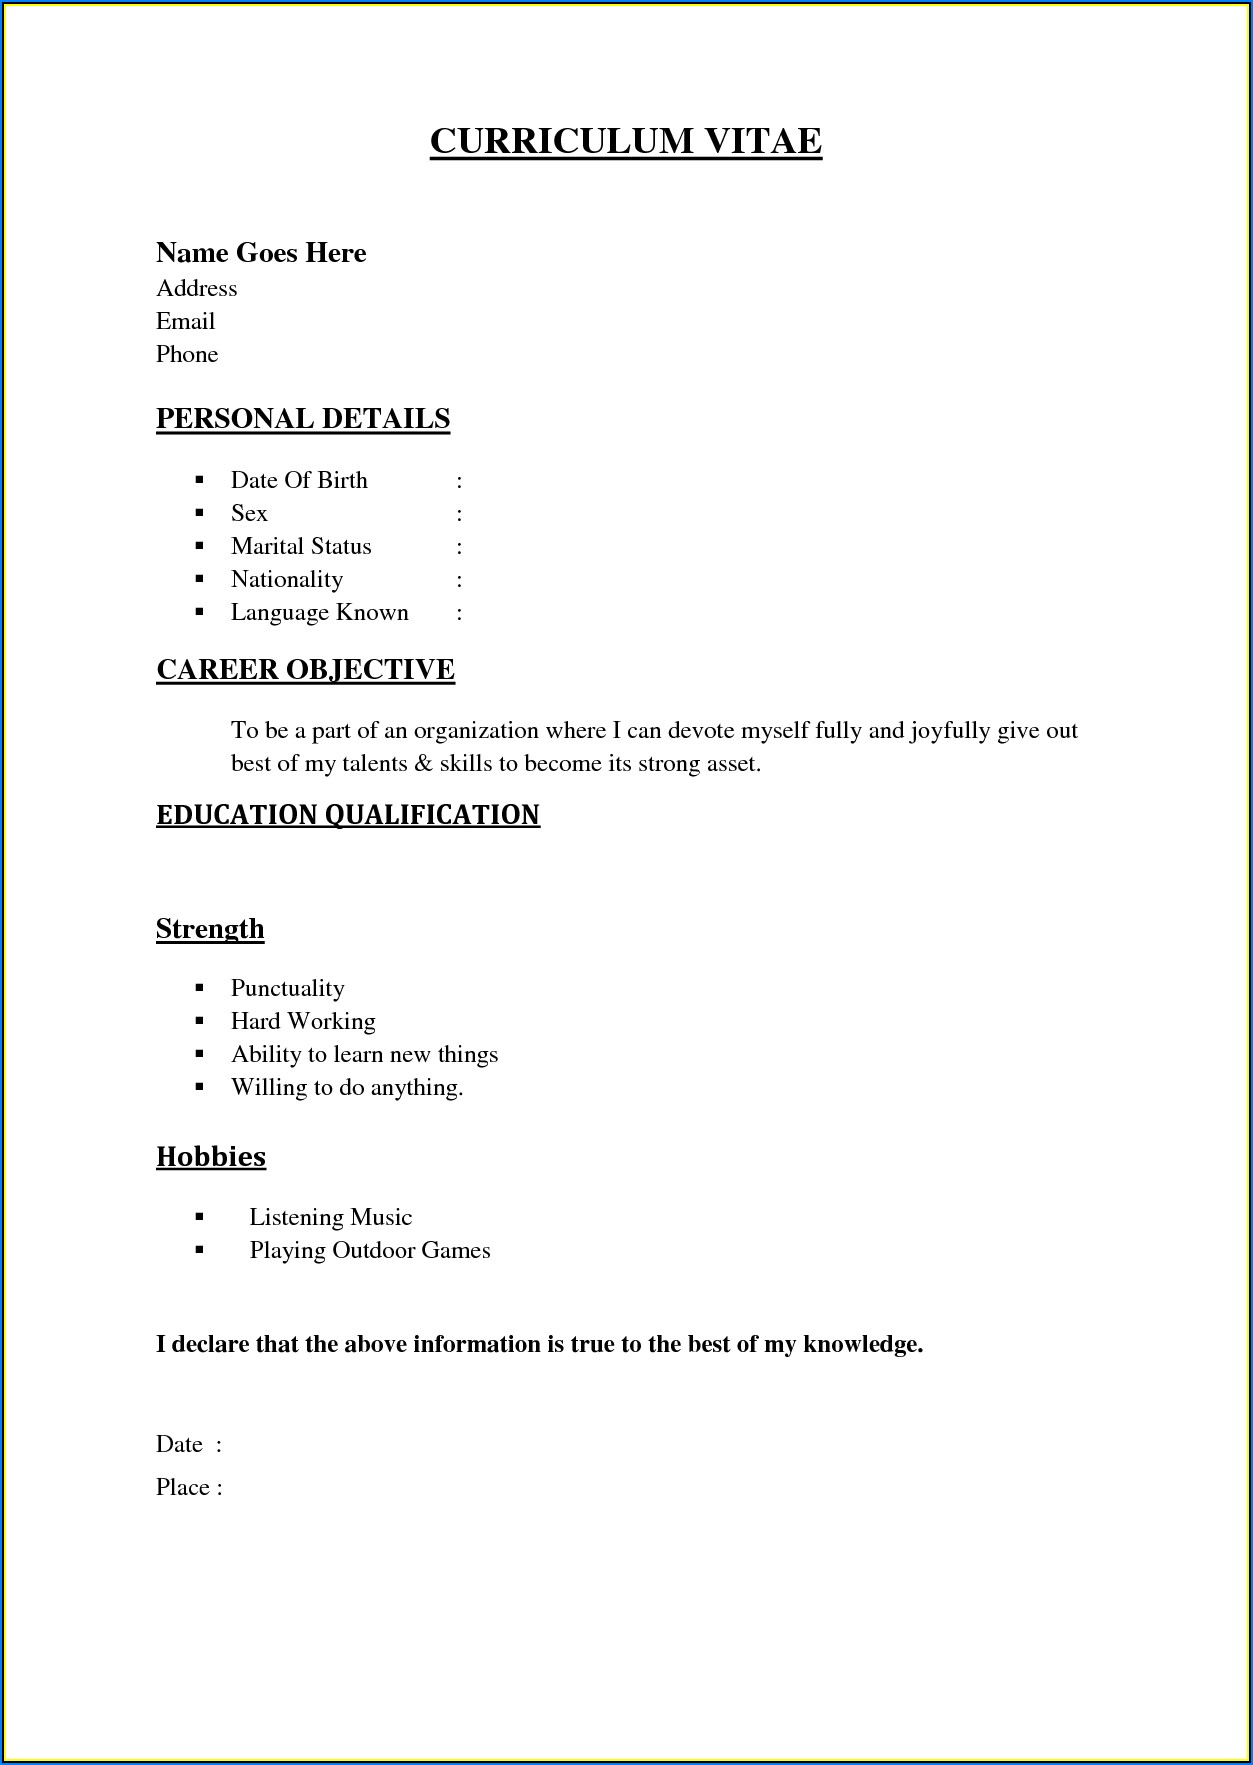 Sample Of A Simple Resume Format